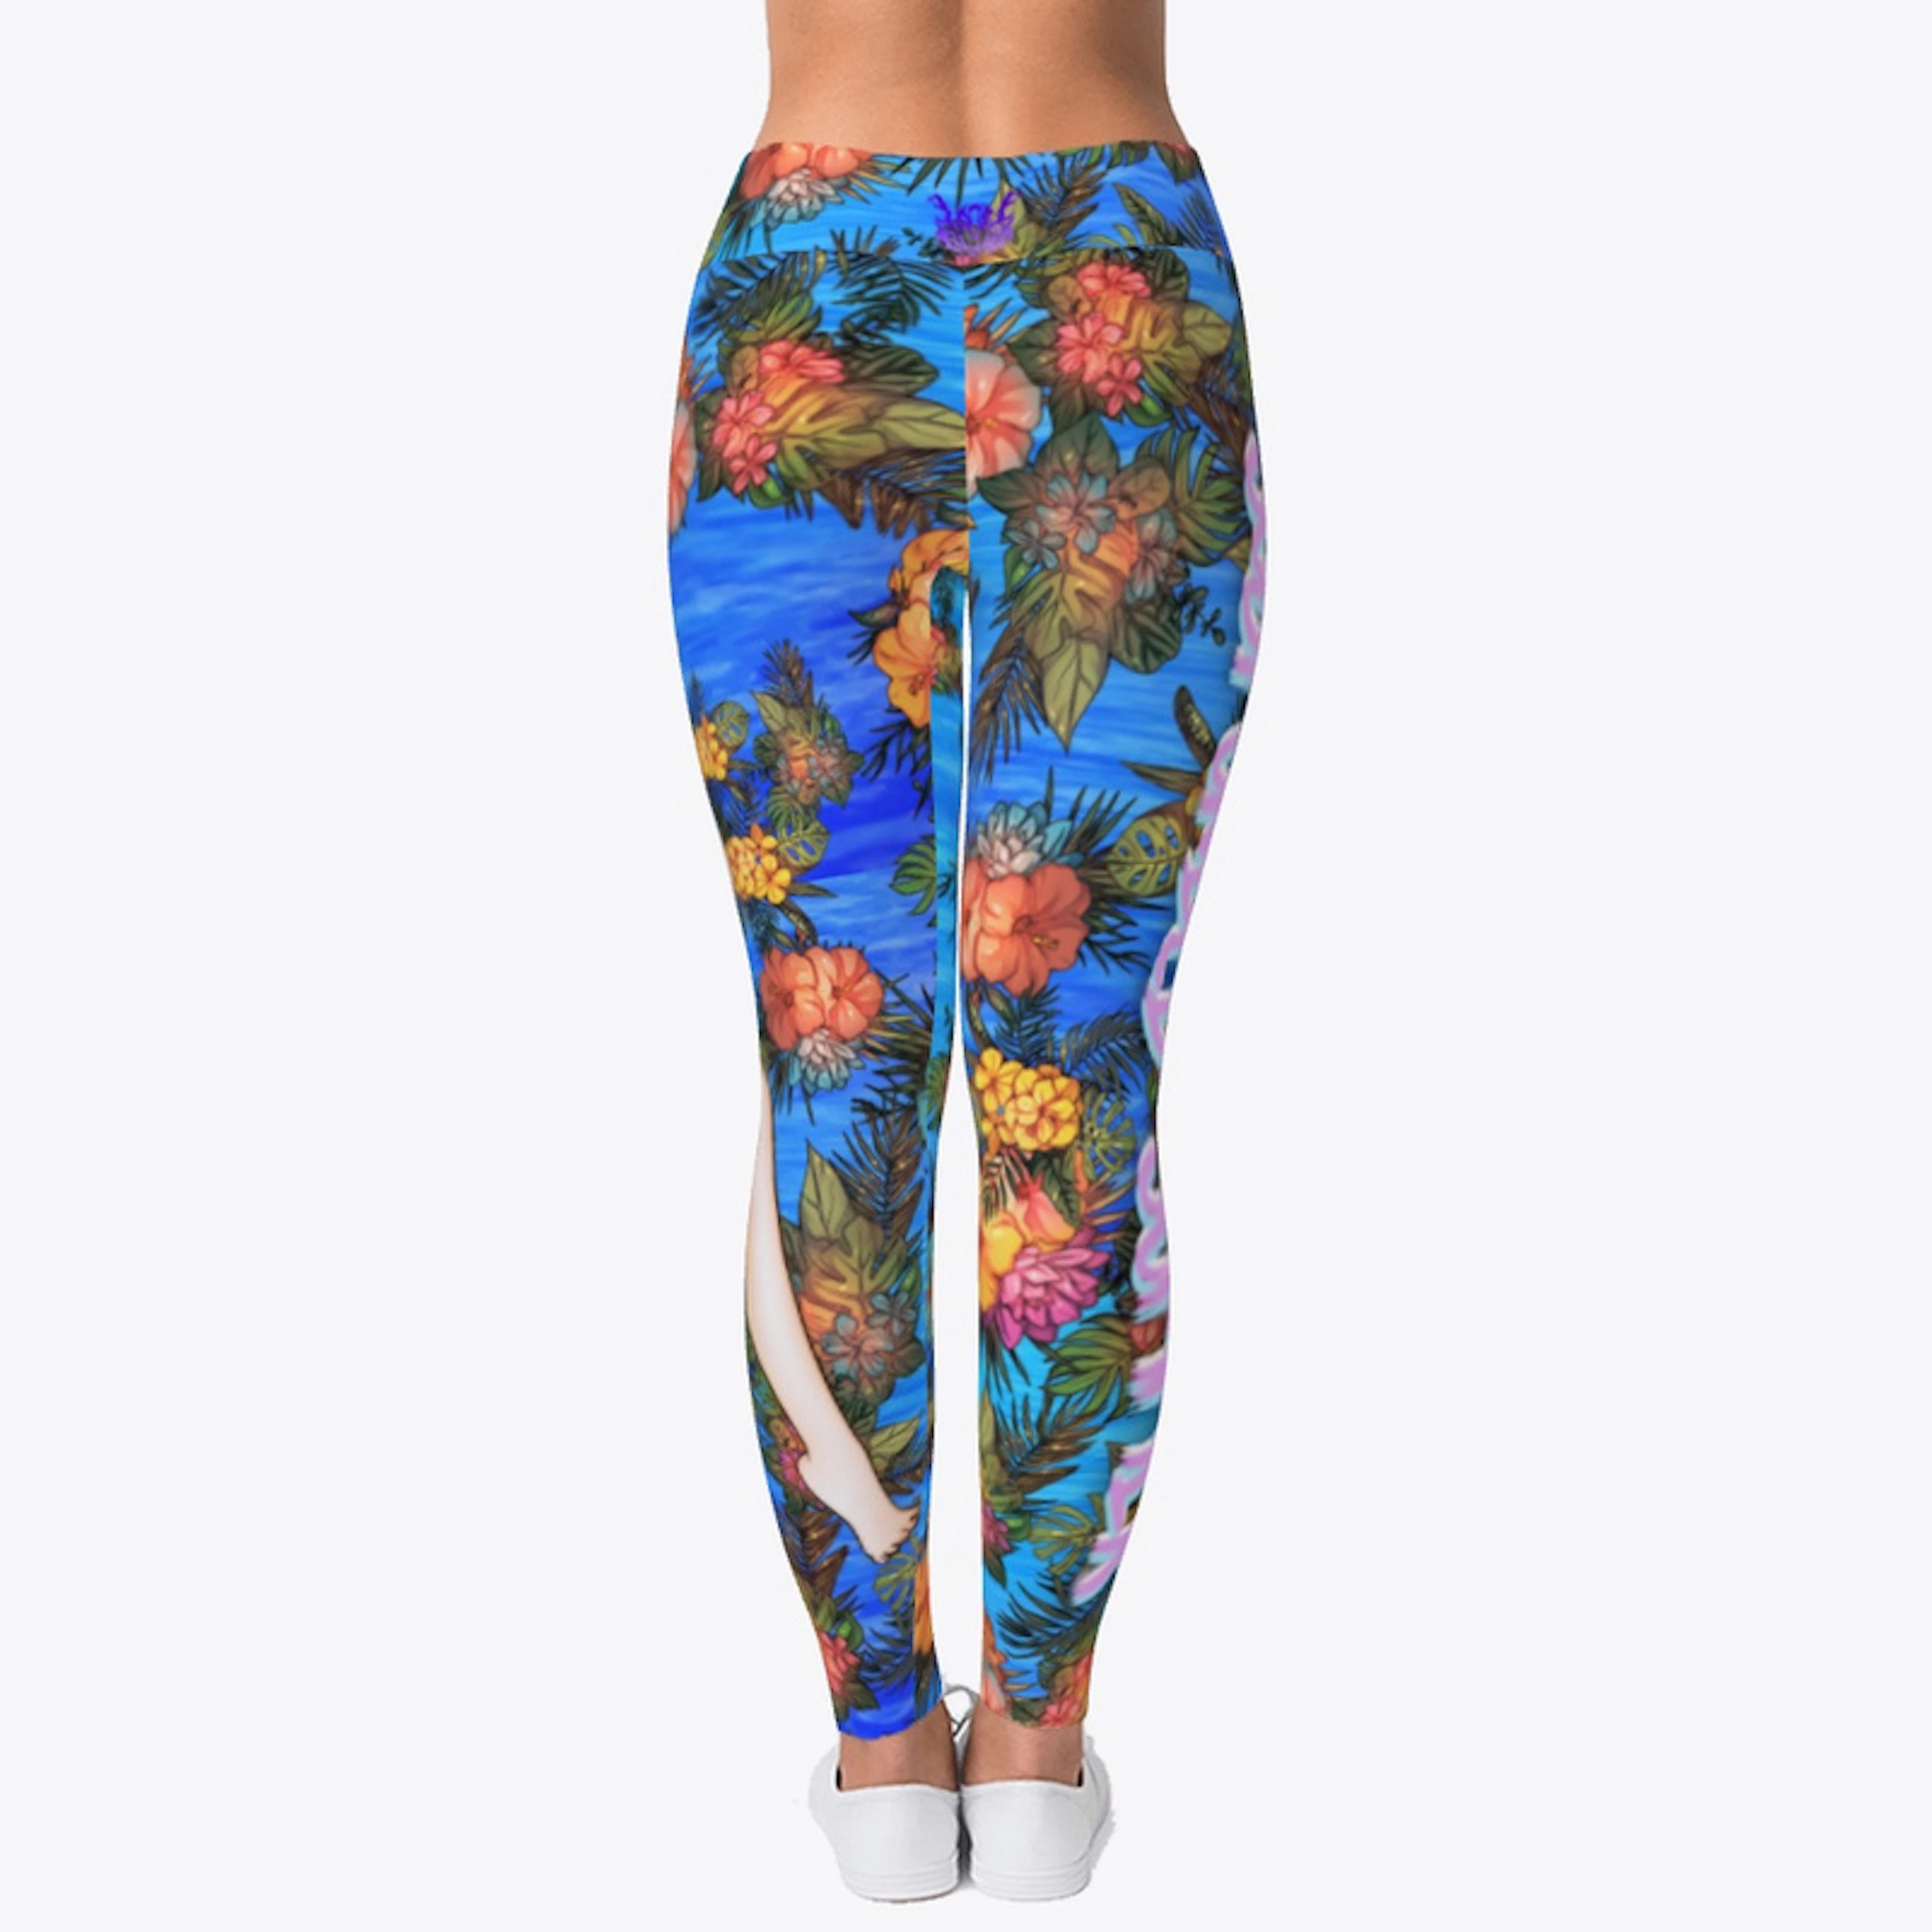 SUMMER COLLECTION 2 LEGGINGS